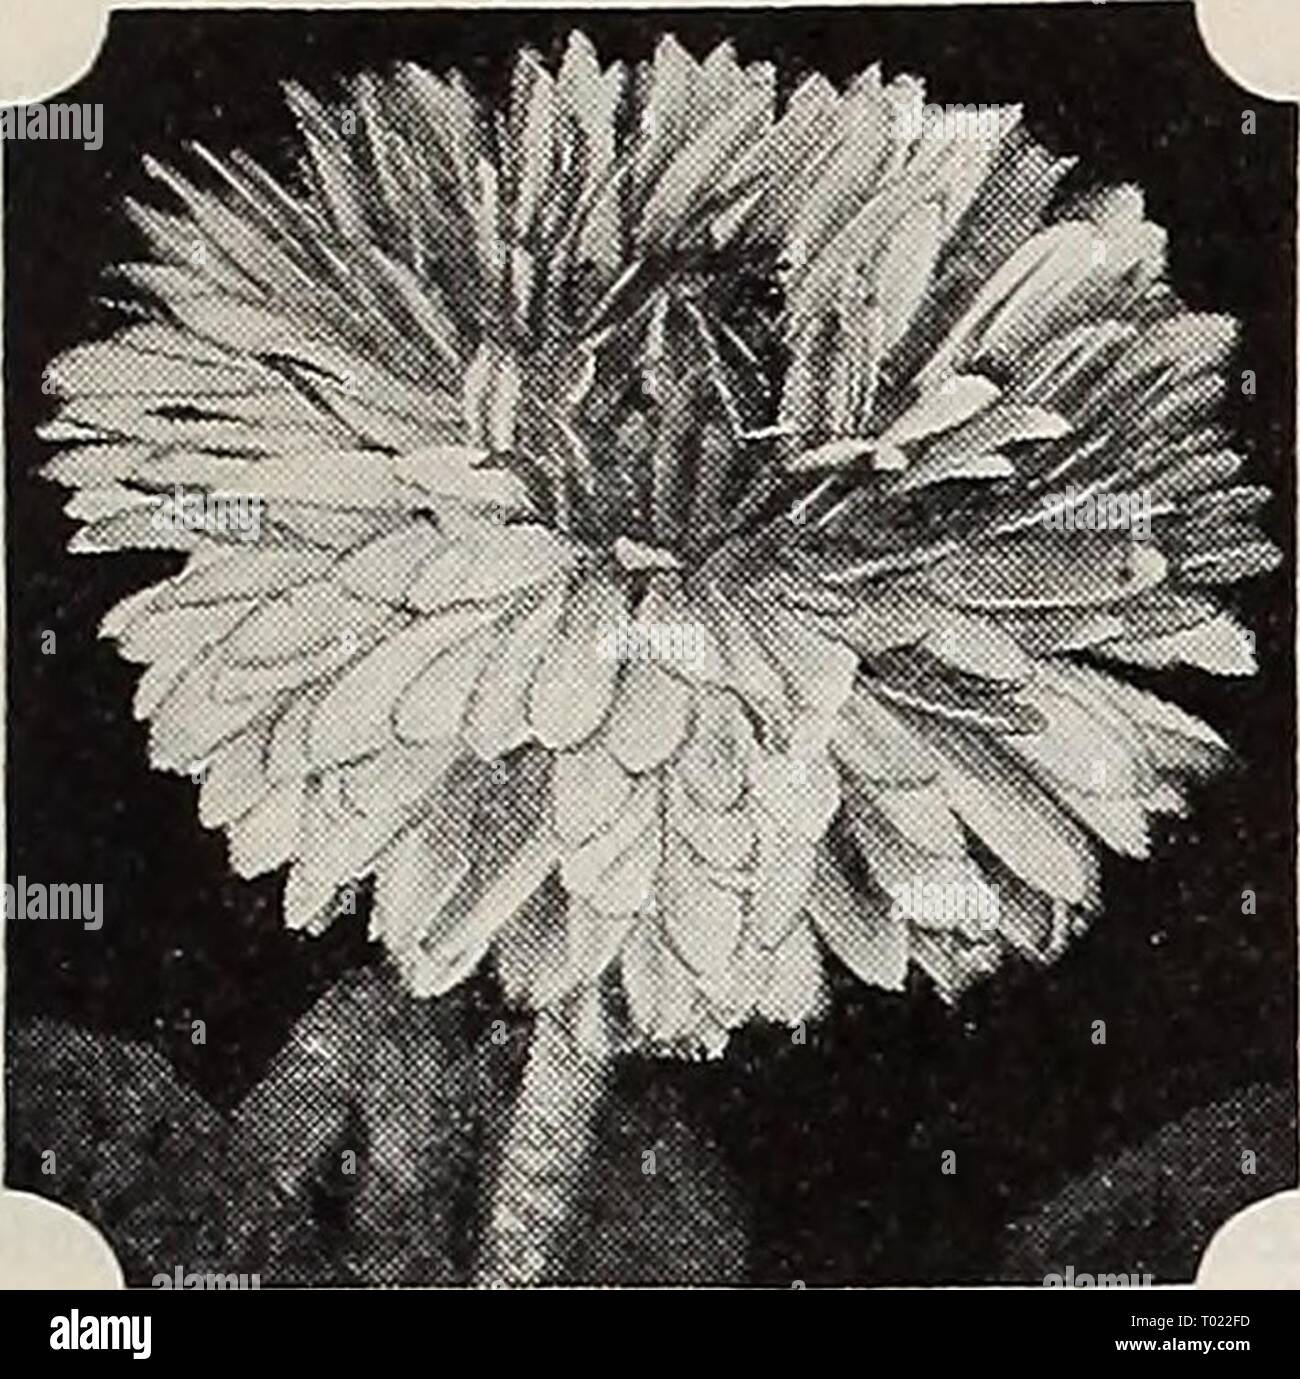 Dreer's garden book for 1940 . dreersgardenbook1940henr Year: 1940  HENRY A. DREER, Inc., Philadelphia, Pa.    Bellis, English Daisy BzWtS—English Daisy (§) A ® Our special strain produces fully double flowers of truly enormous size. They bloom profusely from early spring until late fall. Plant in soil which is moderately moist and does not lack fertility. 6 in. 1491 Giant Double Crimson (New). Pkt. 25c; special pkt. 75c. 1492 — Double Red. 1493 — Double Rose. 1494 - Double White. Any of the above except Crimson: Pkt. 15c; special pkt. 60c. 1496 Giant Double Mixed. Pkt. I5c; special pkt. 50c.  Stock Photo